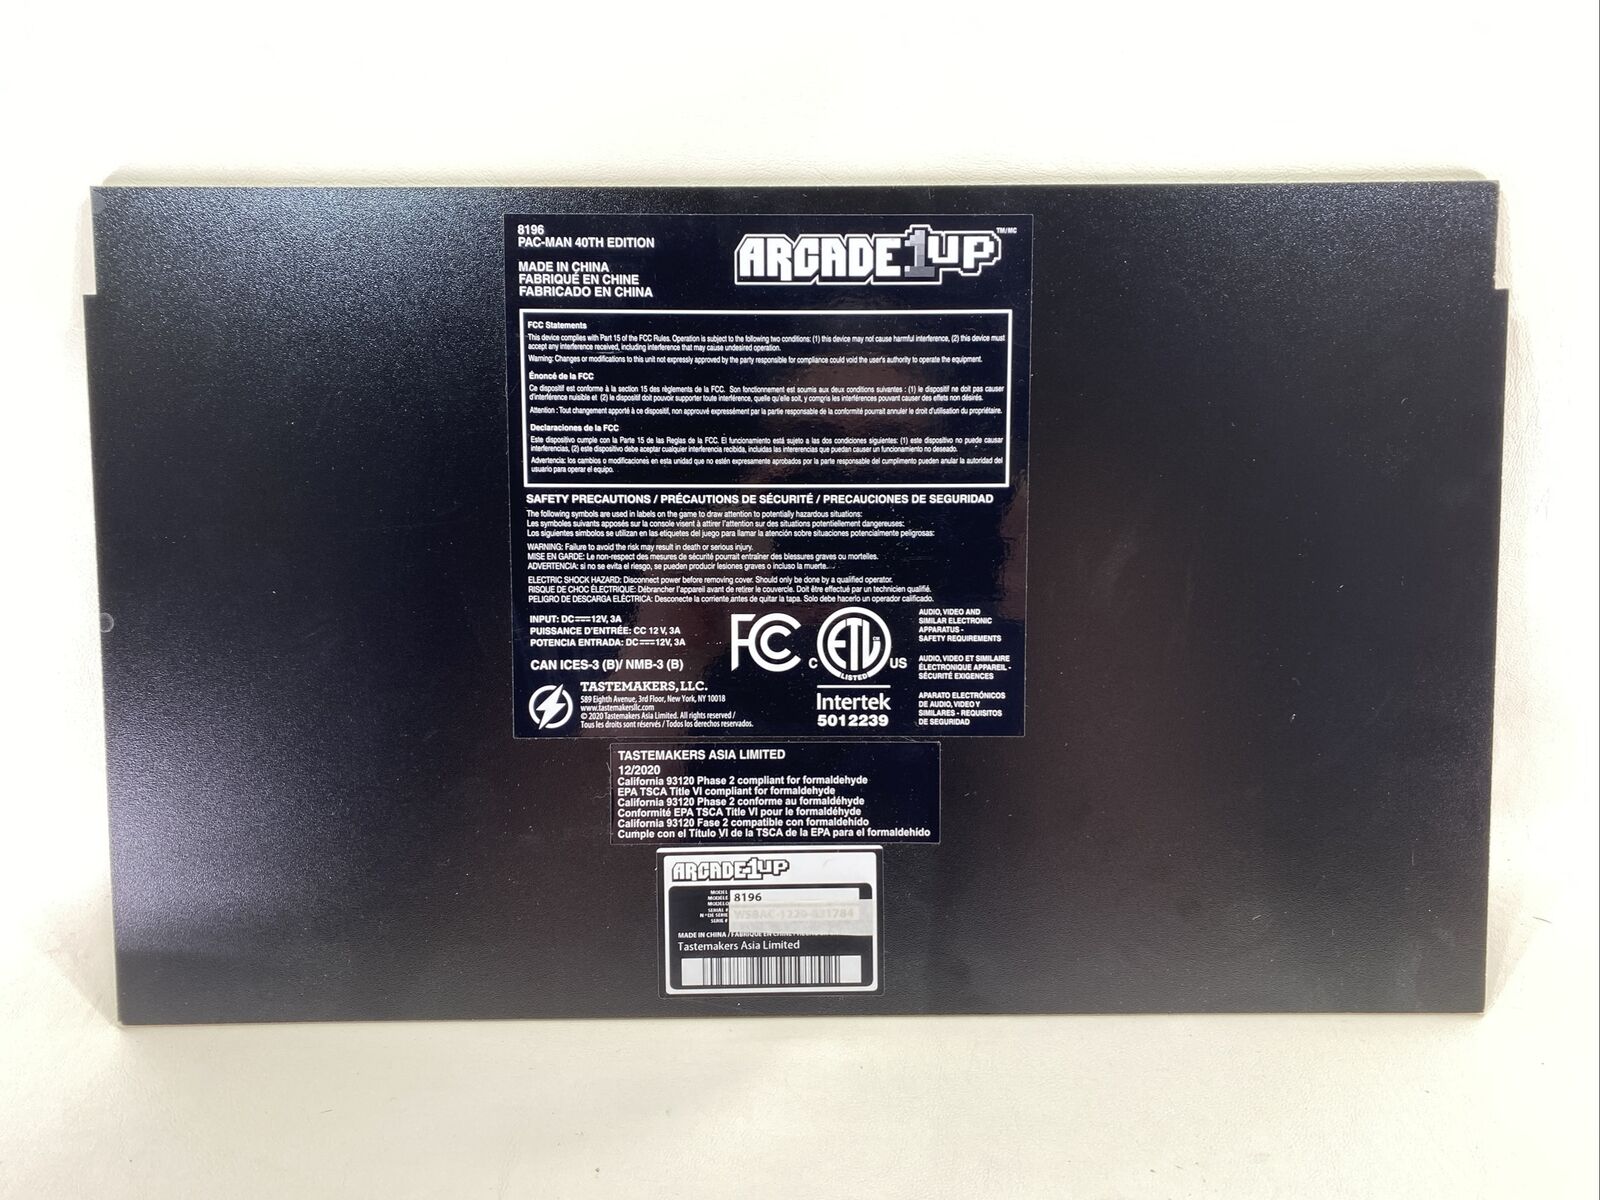 Arcade1up H Panel Pac-Man 40th Edition Brand New Serial Number Never Registered